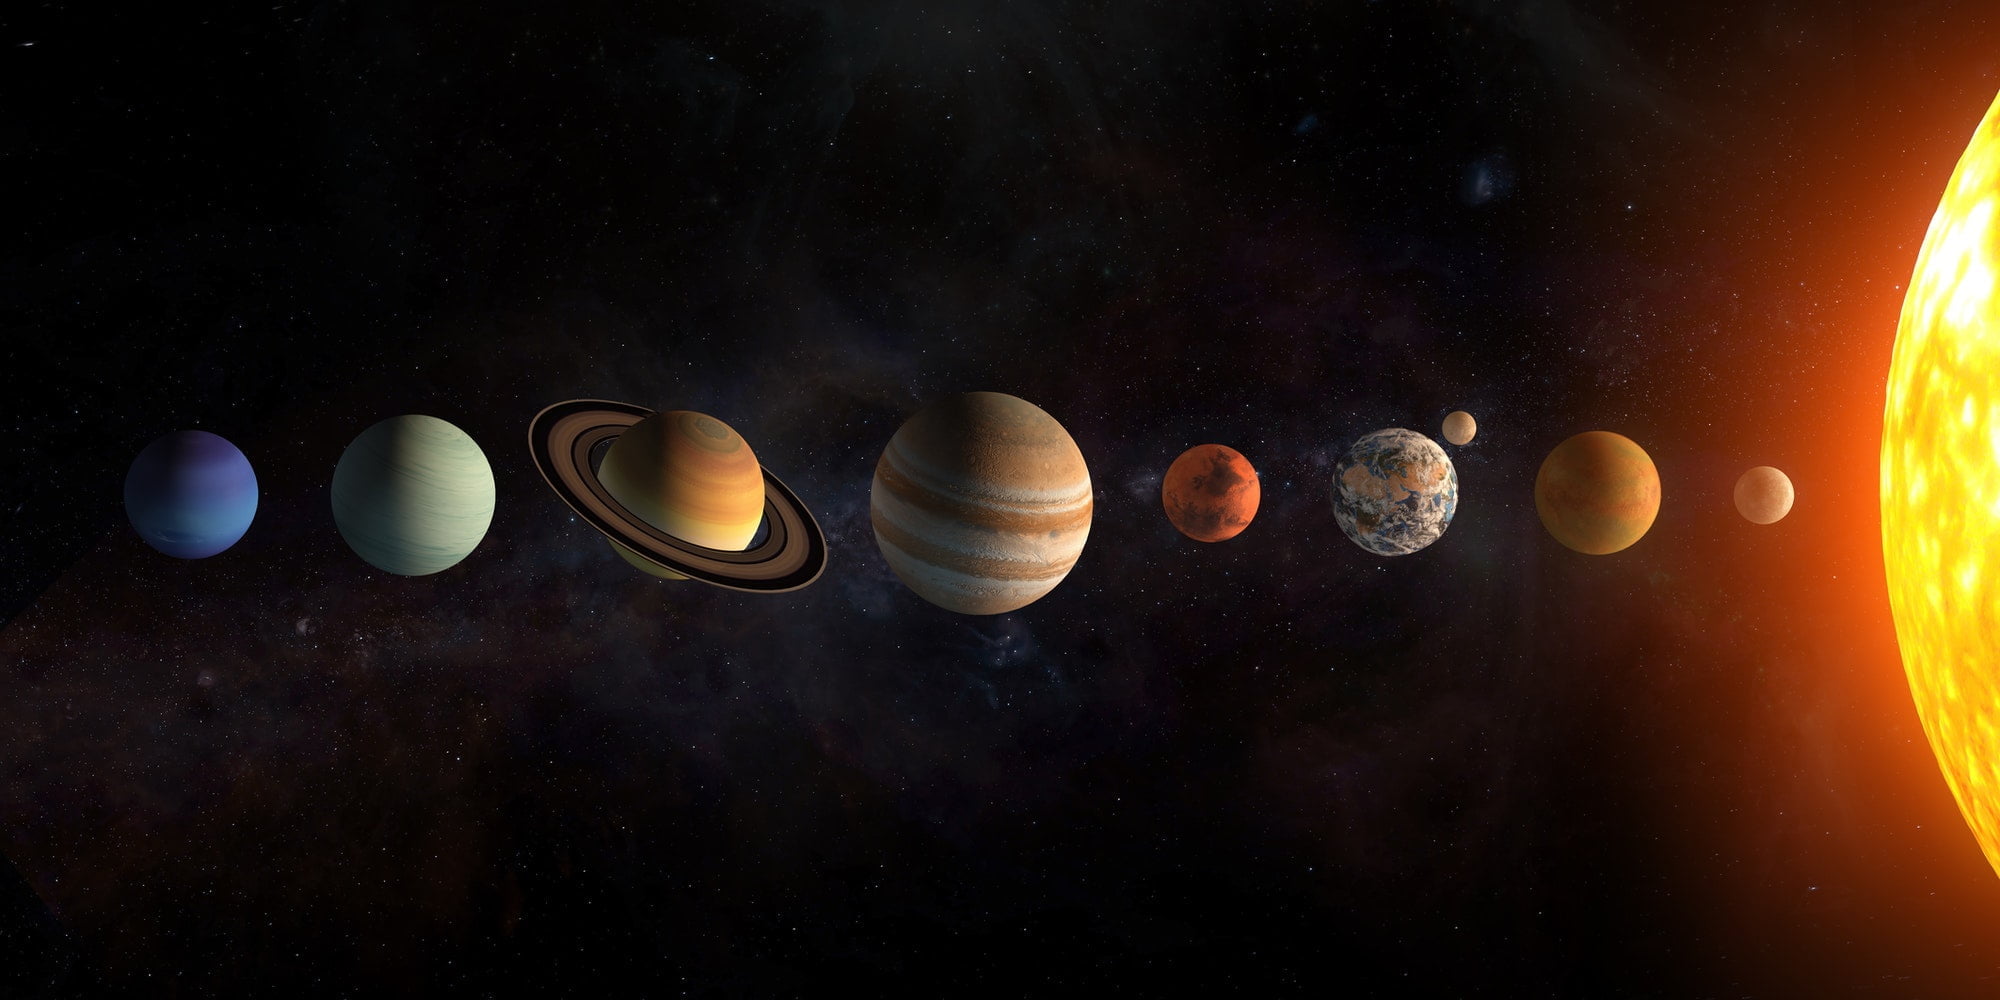 solar-system-planets-set-the-sun-and-planets-in-a-row-on-univer.jpg